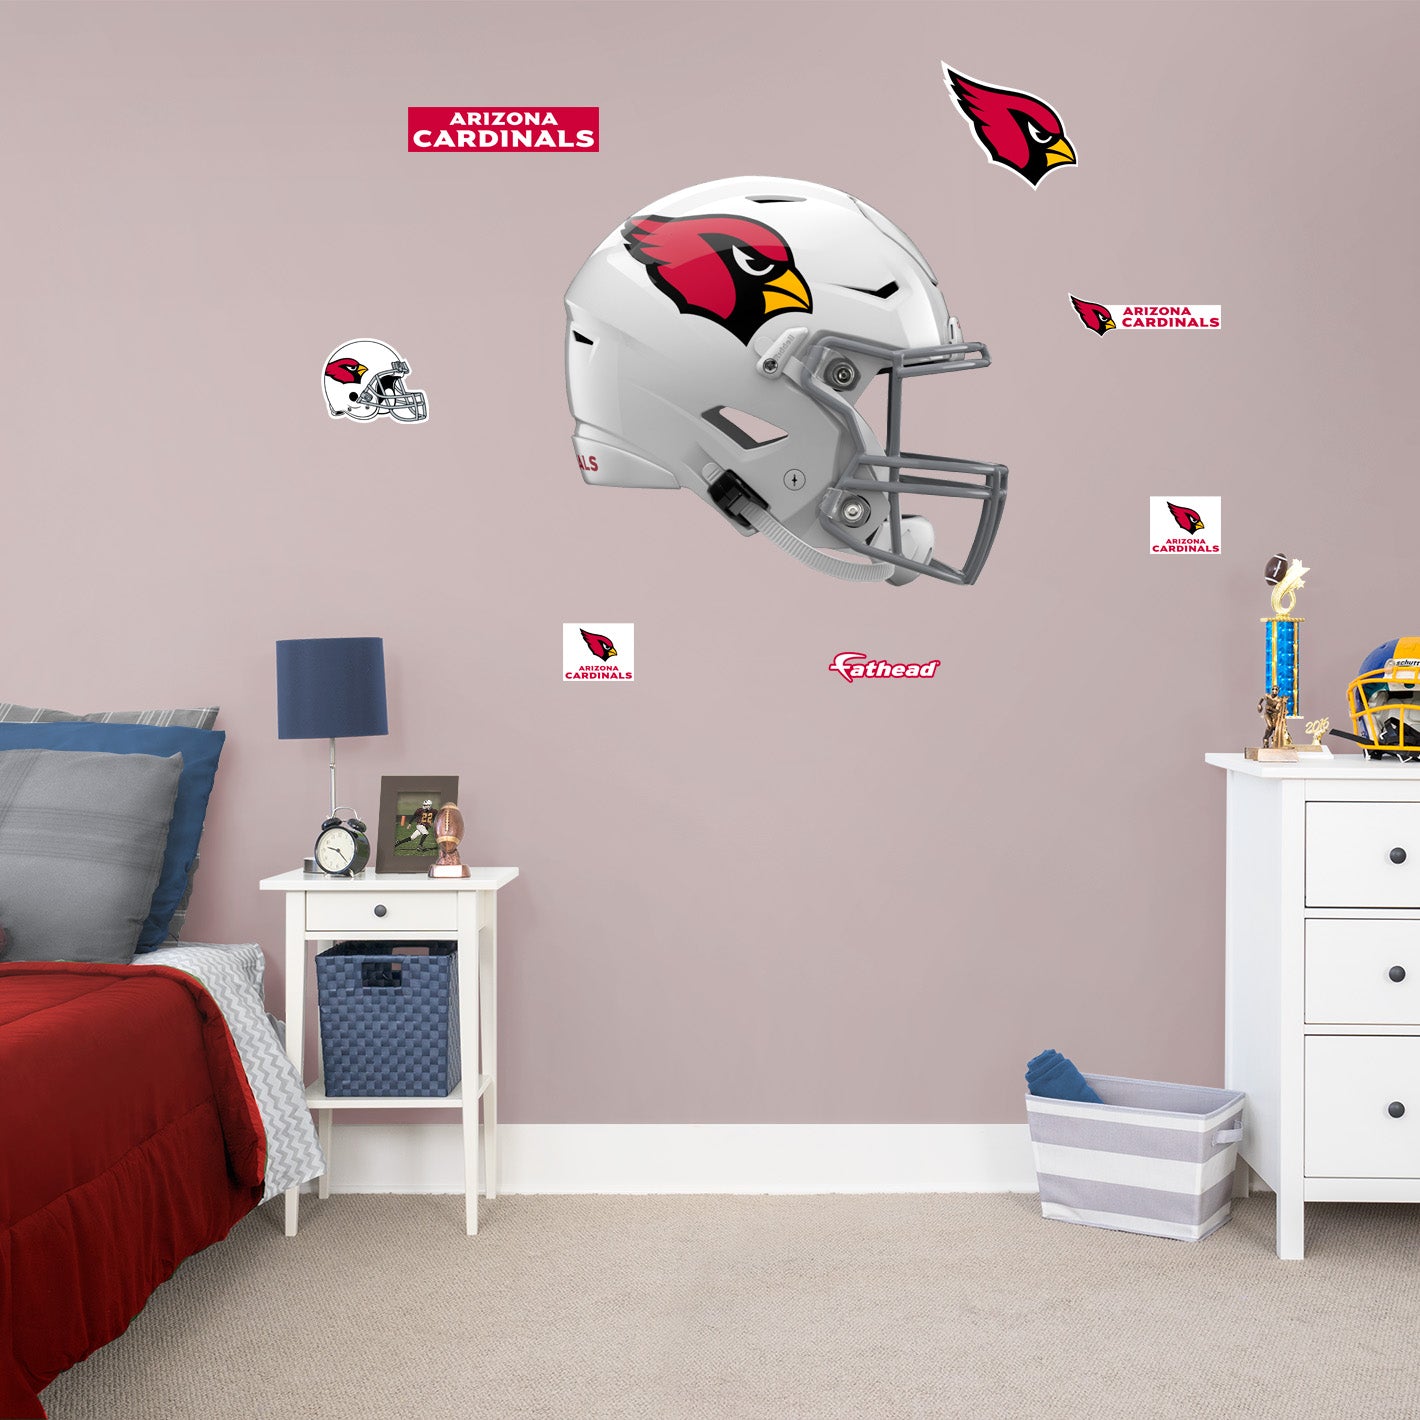 Arizona Cardinals: Helmet - Officially Licensed NFL Removable Adhesive Decal